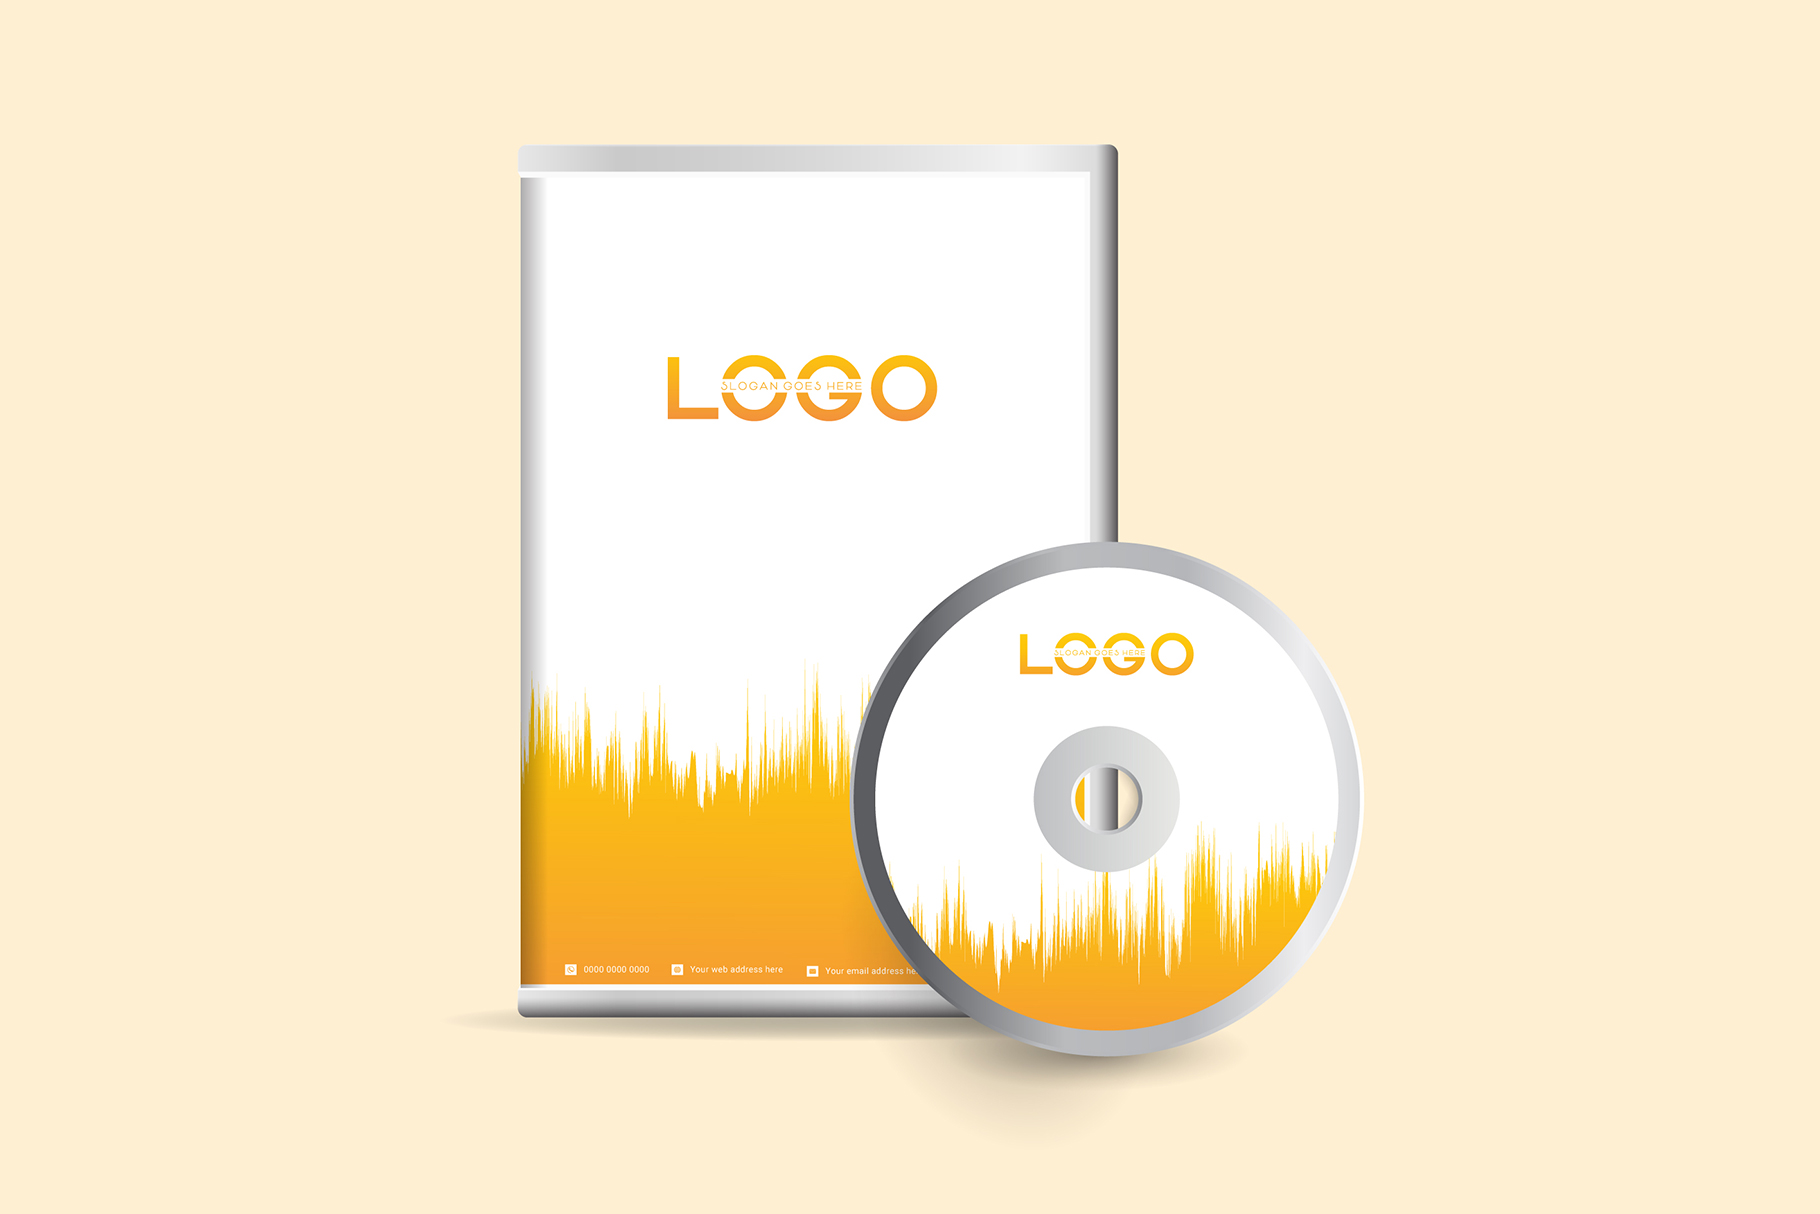 Download Mockup Cd Png Free Packaging Mockup Free Packaging Mockups To Download Boxes Wine Bottles Digipack And Other Great Packaging Mockups Available To Free Download Yellowimages Mockups